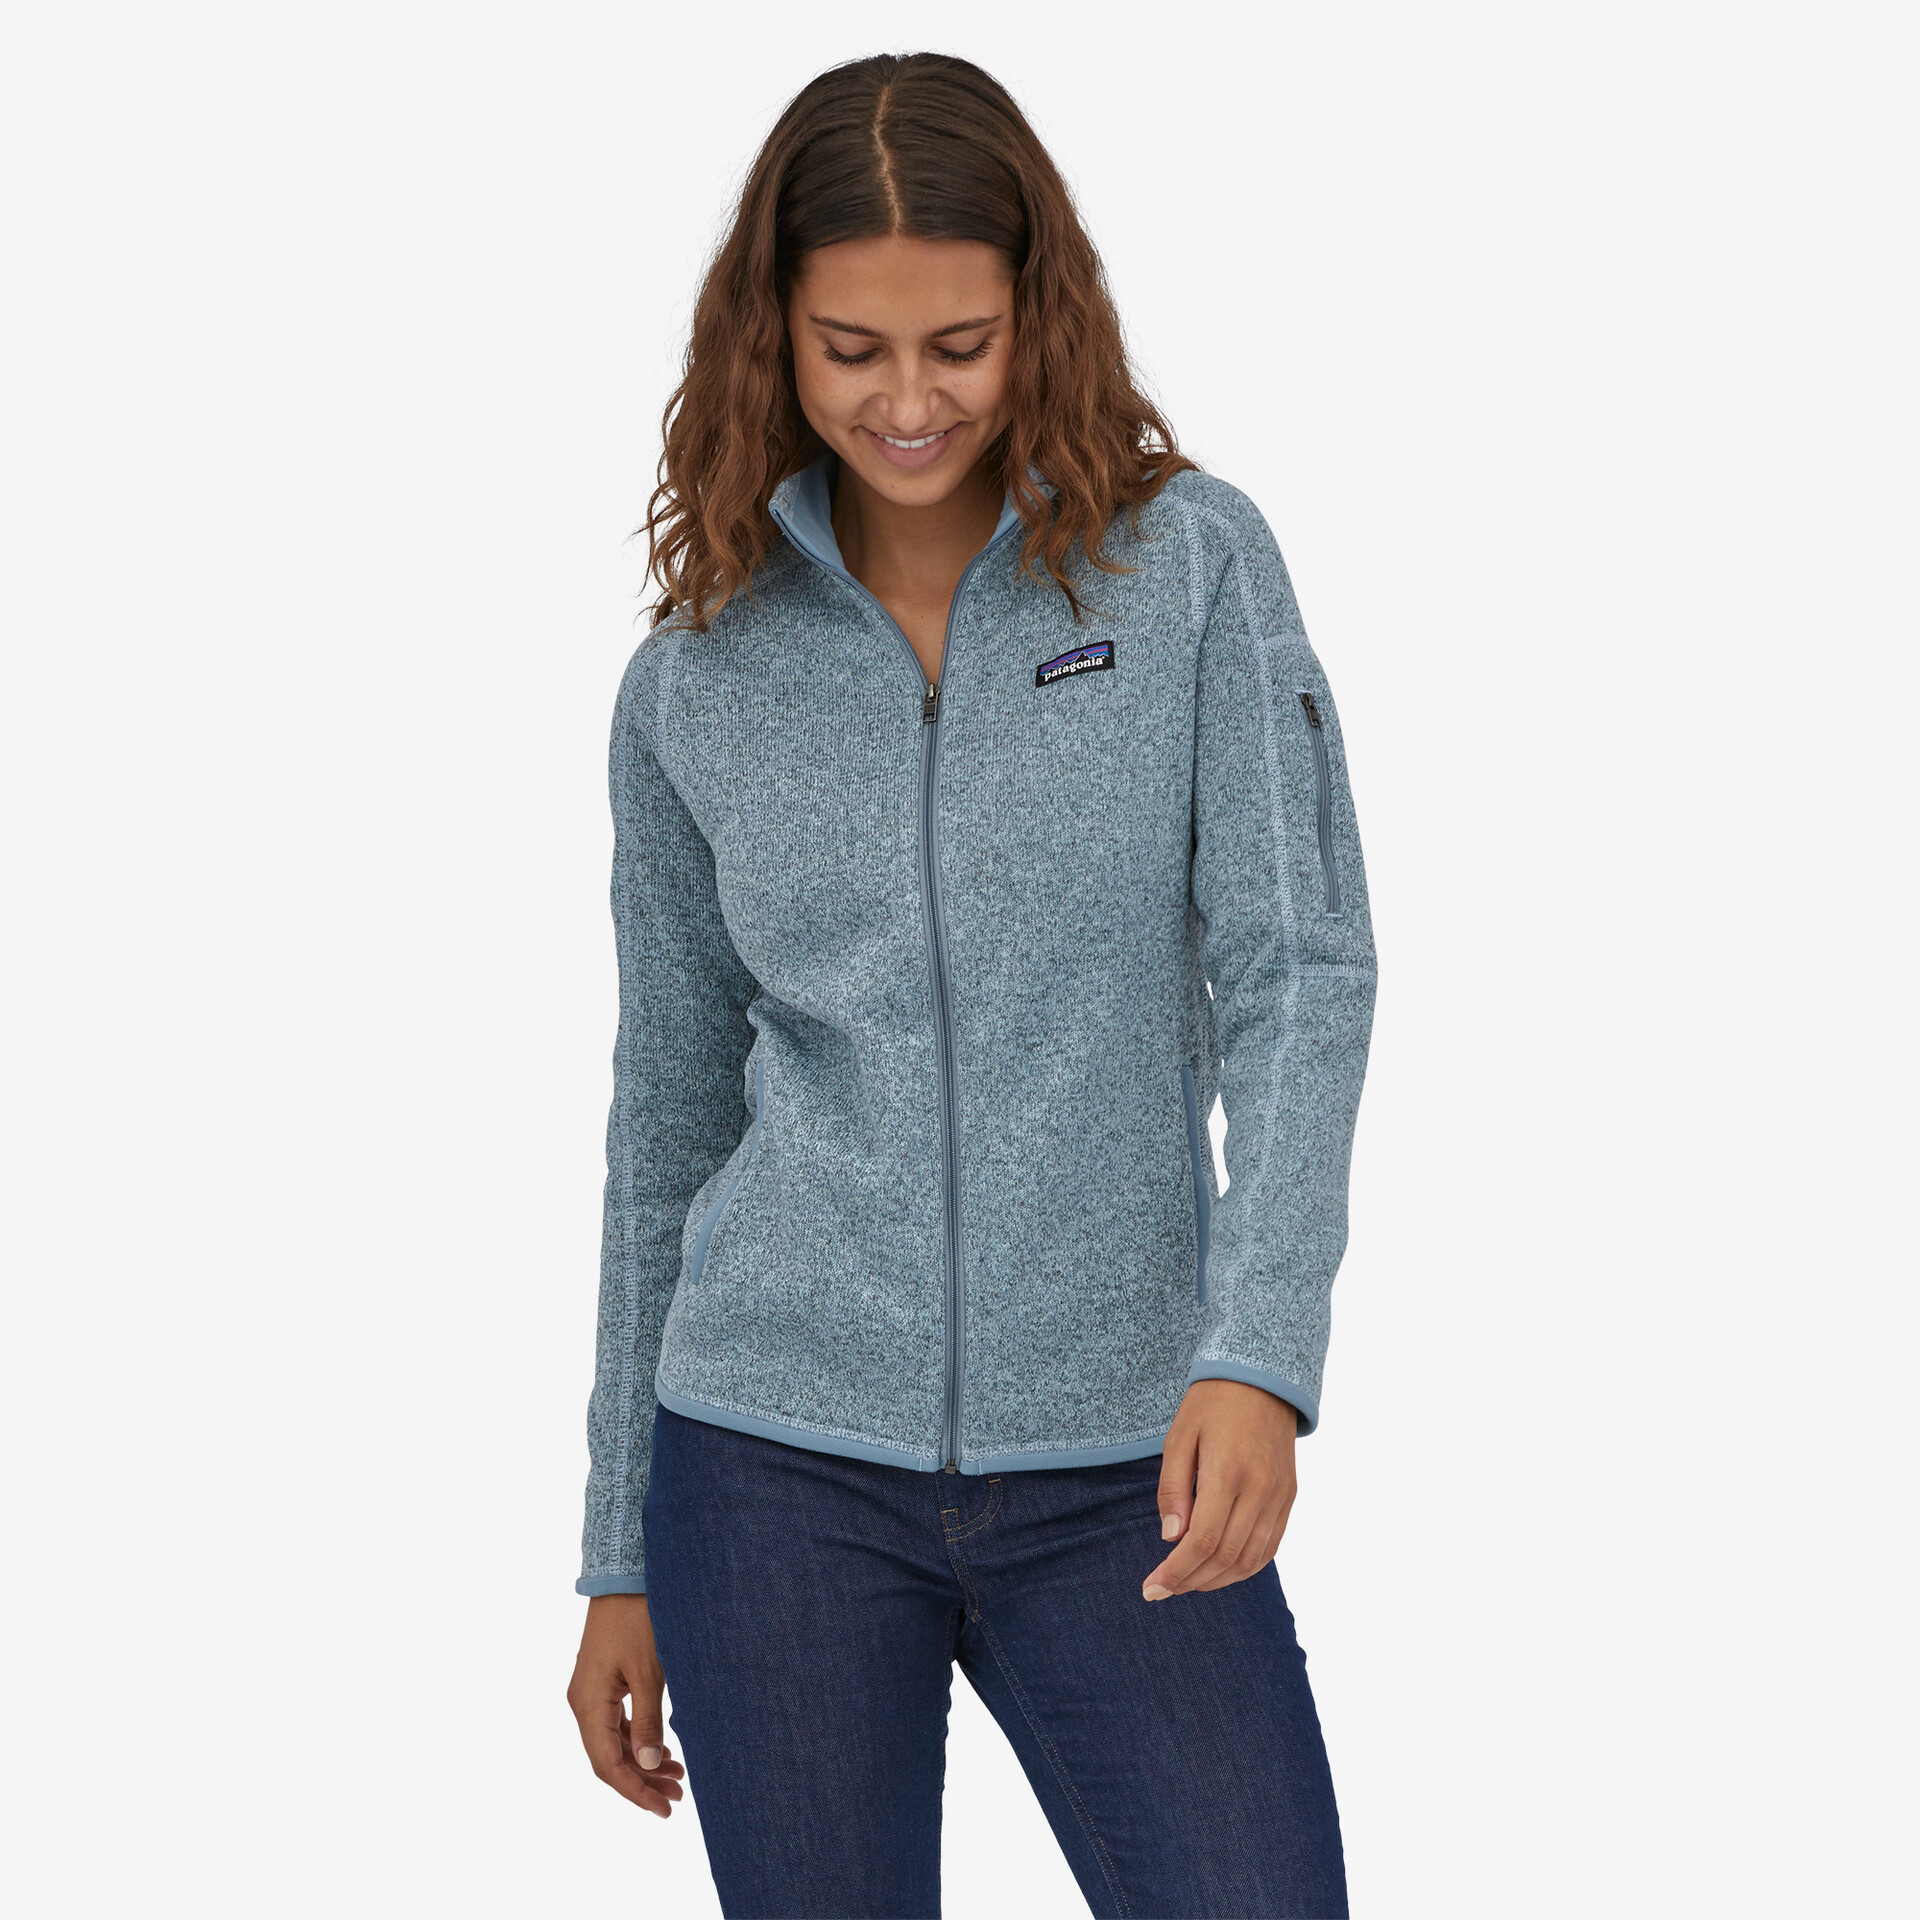 Better Sweater Fleece Jacket by Patagonia, sustainable and stylish women's fleece with a contoured fit.